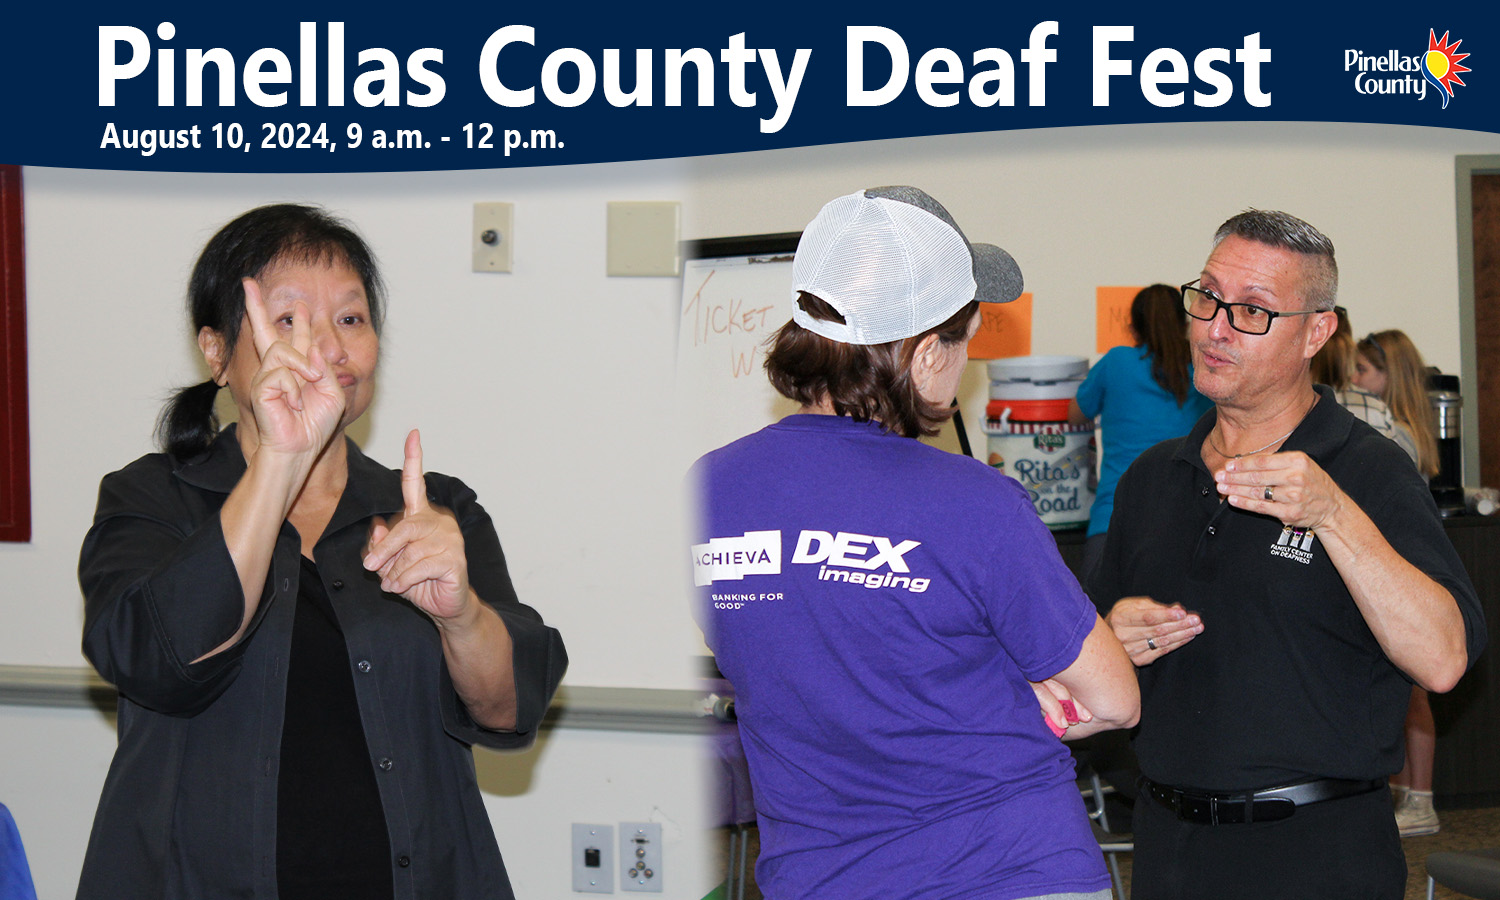 People signing in American Sign Language (ASL). Text reads, "Pinellas County Deaf Fest. August 10, 2024, 9 a.m. - 12 p.m."